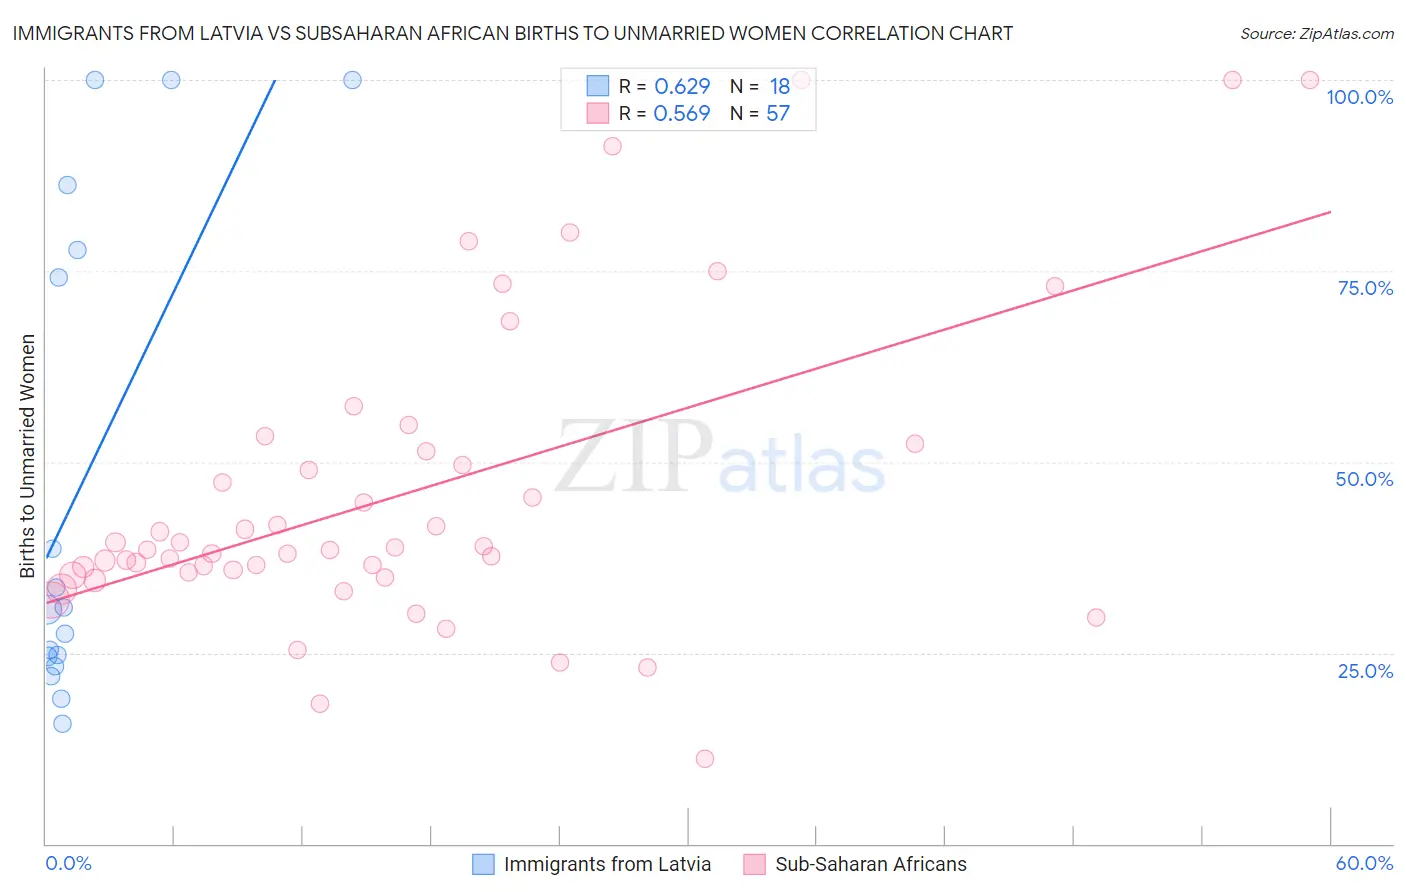 Immigrants from Latvia vs Subsaharan African Births to Unmarried Women